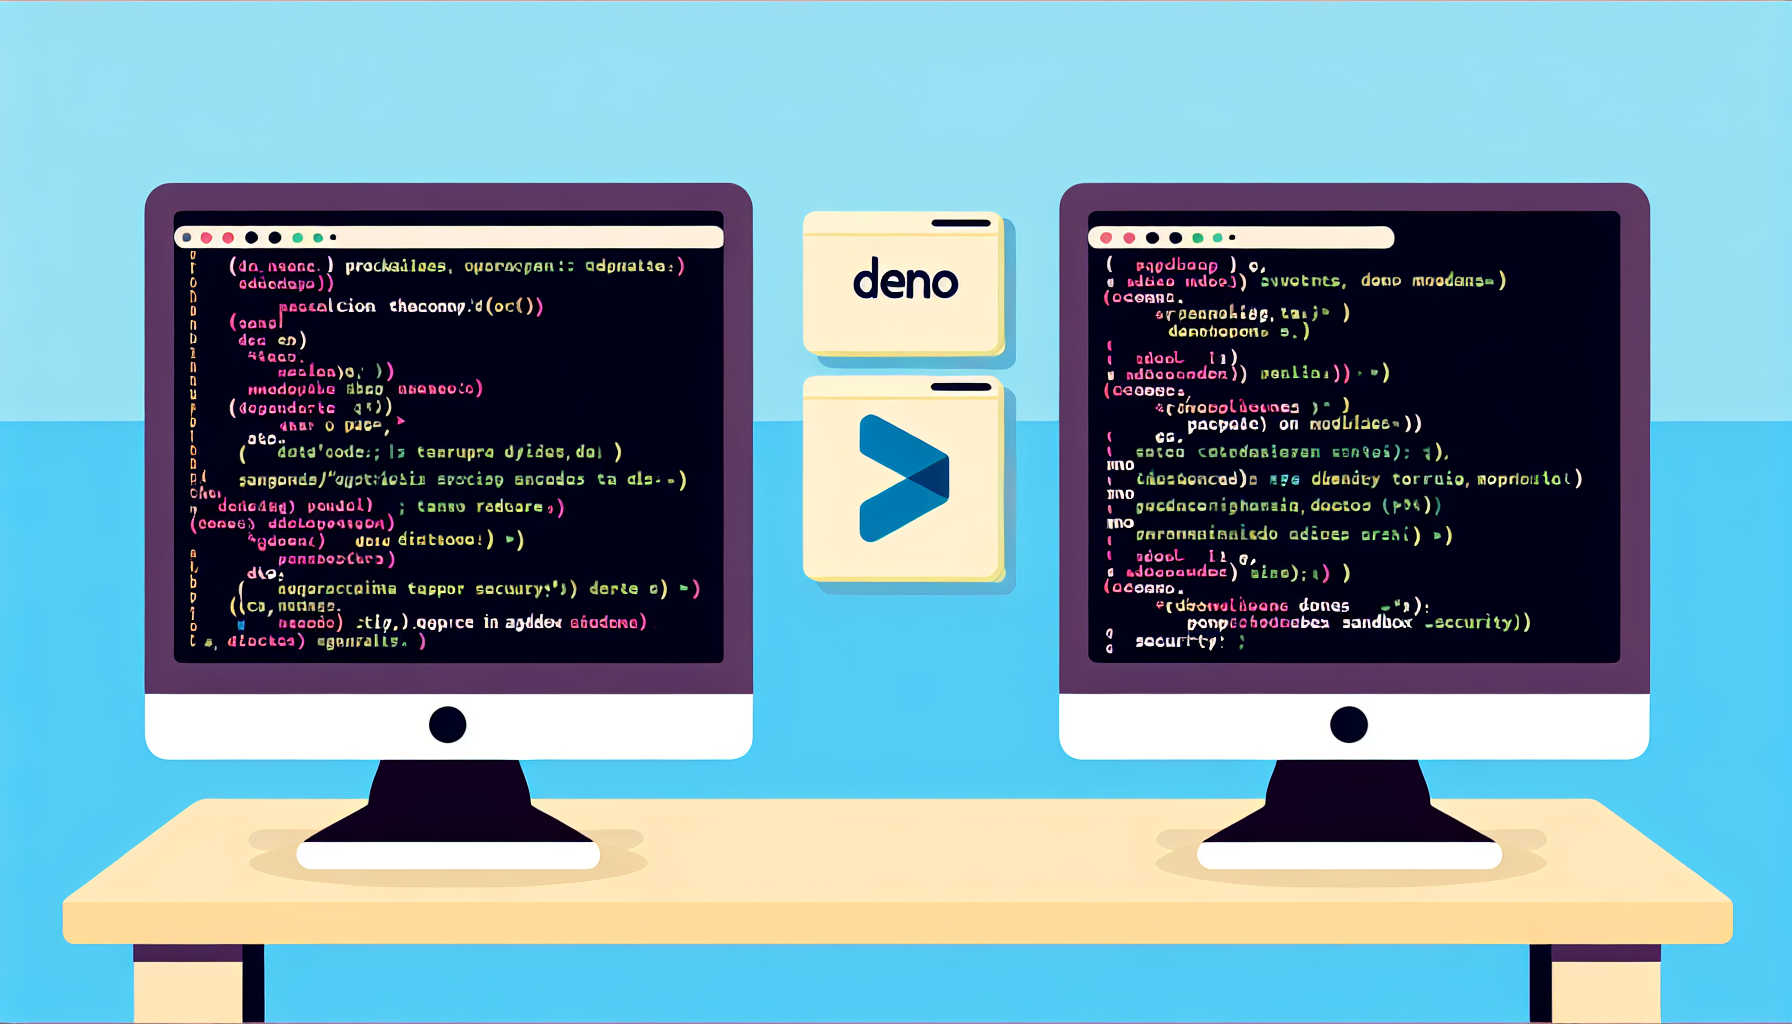 Side-by-side comparison of Node.js and Deno features